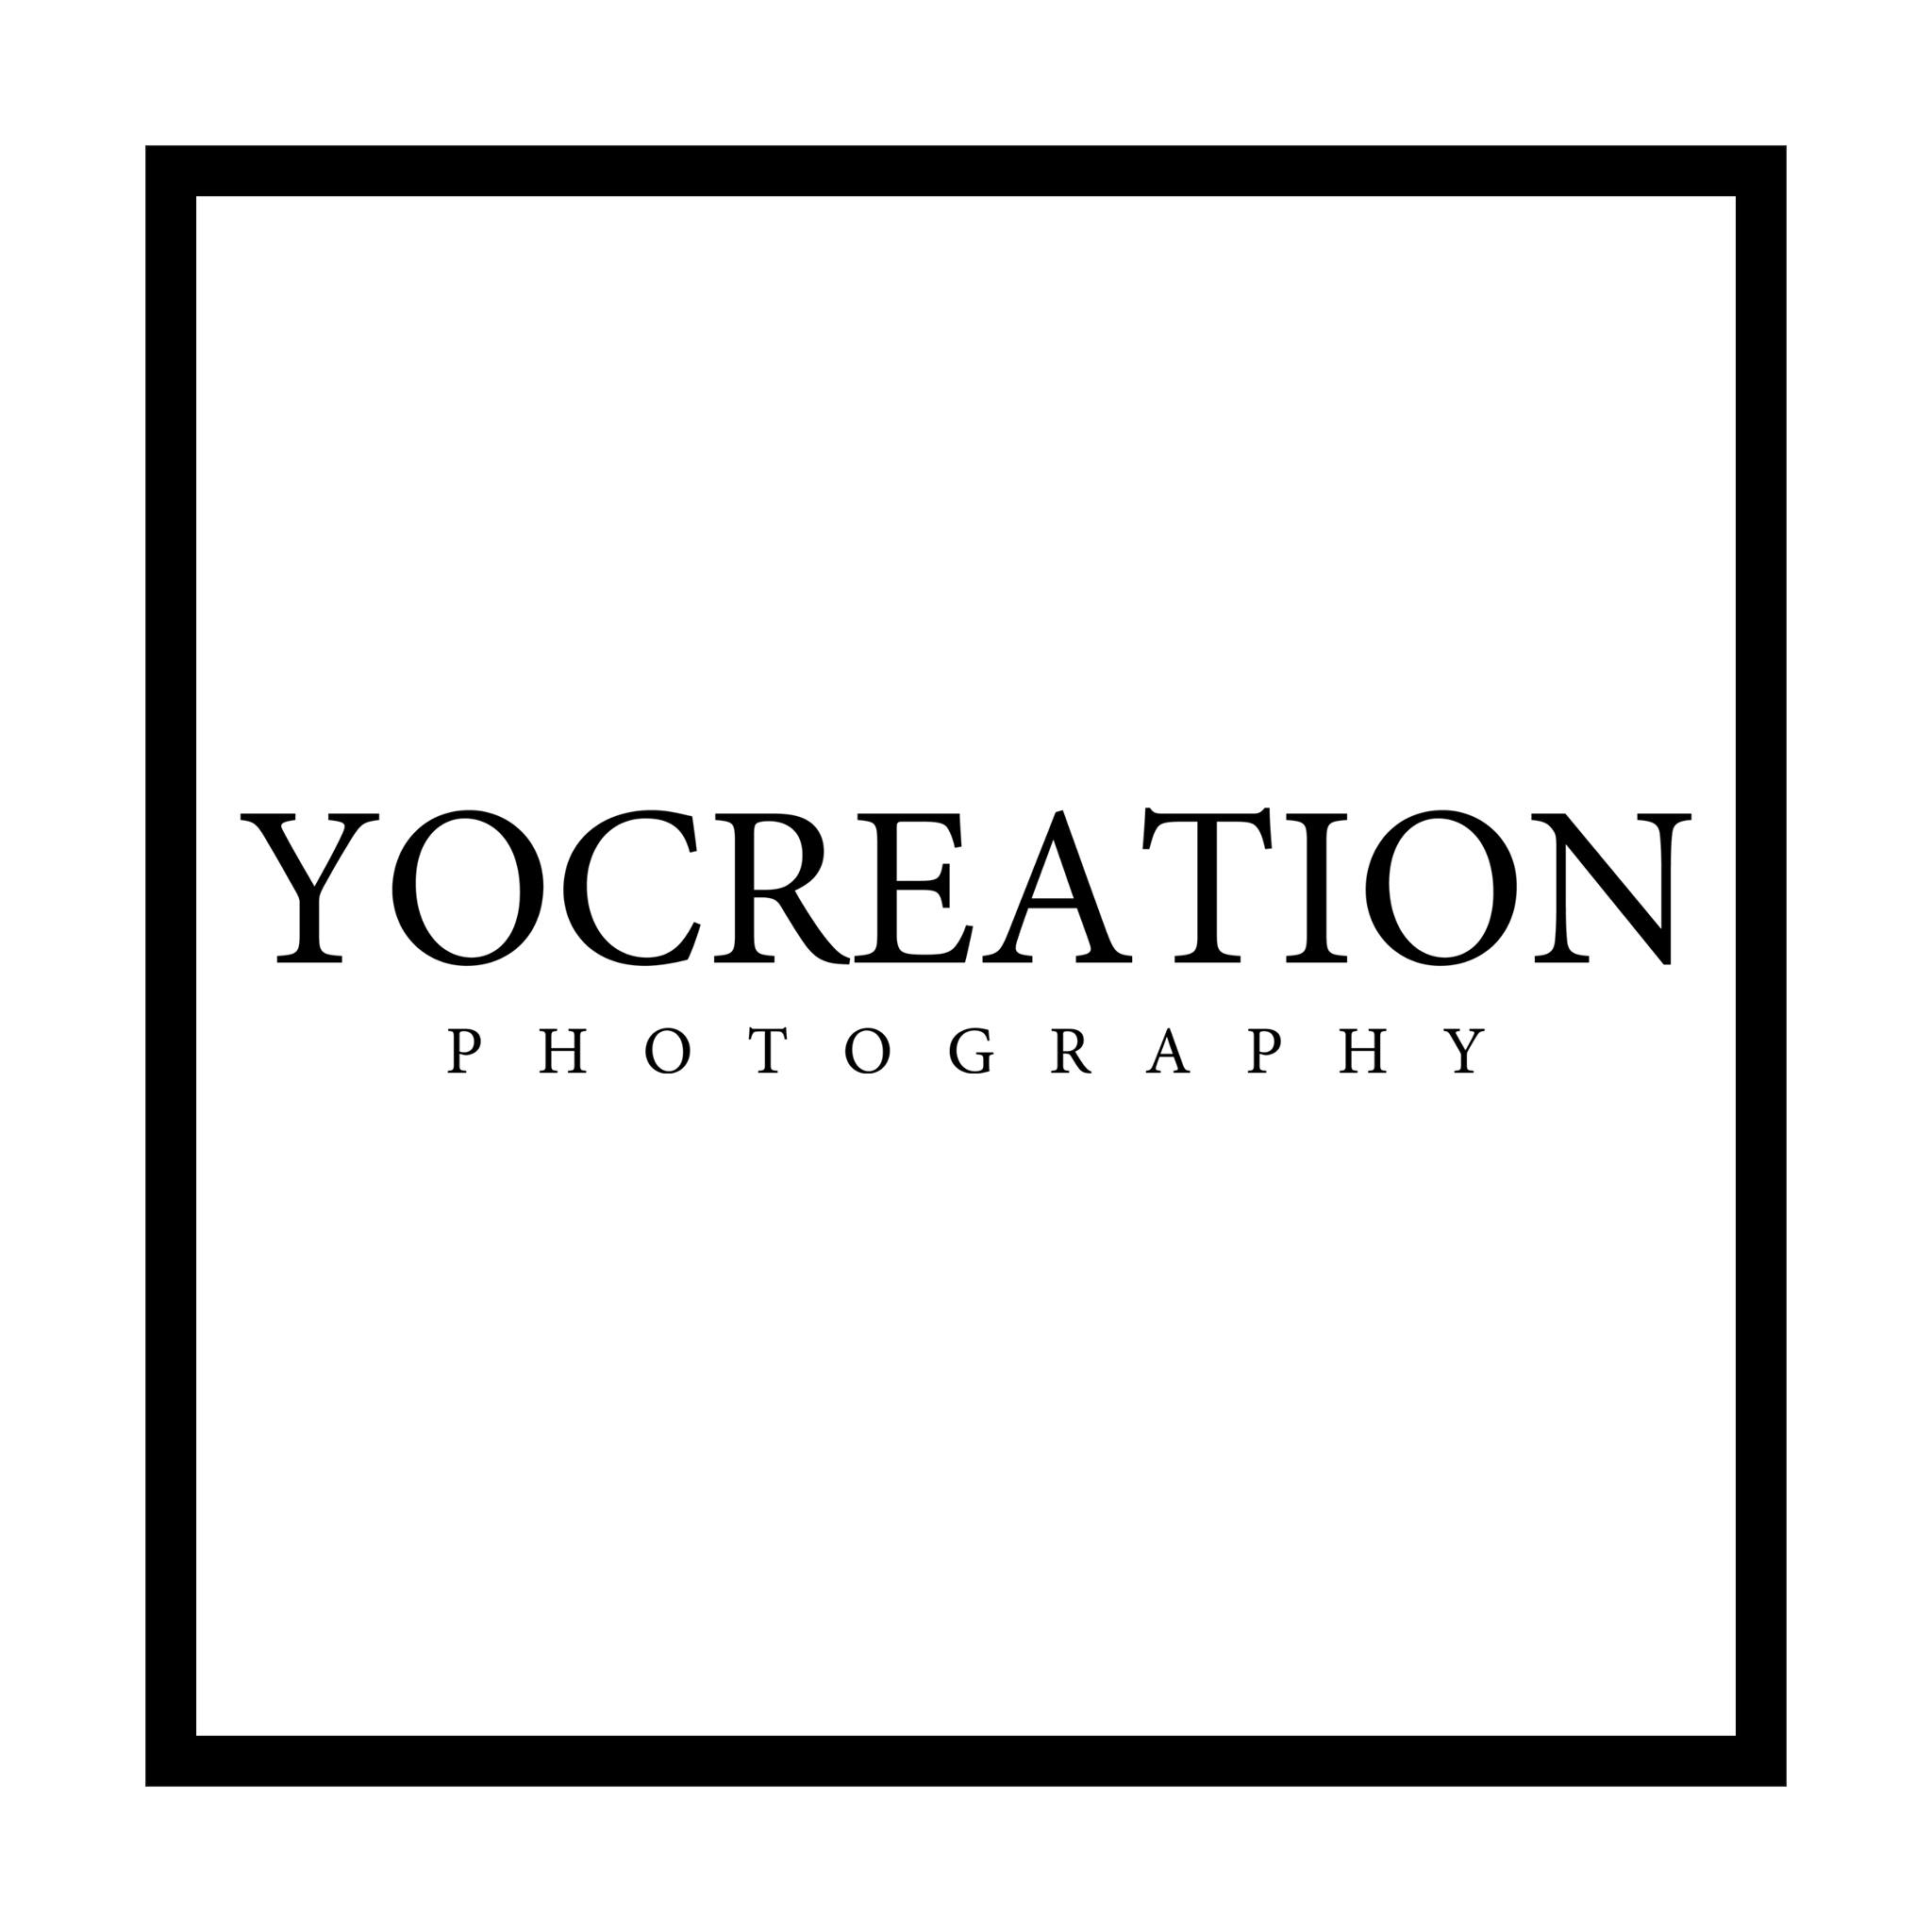 YOCREATION PHOTOGRAPHY|Photographer|Event Services